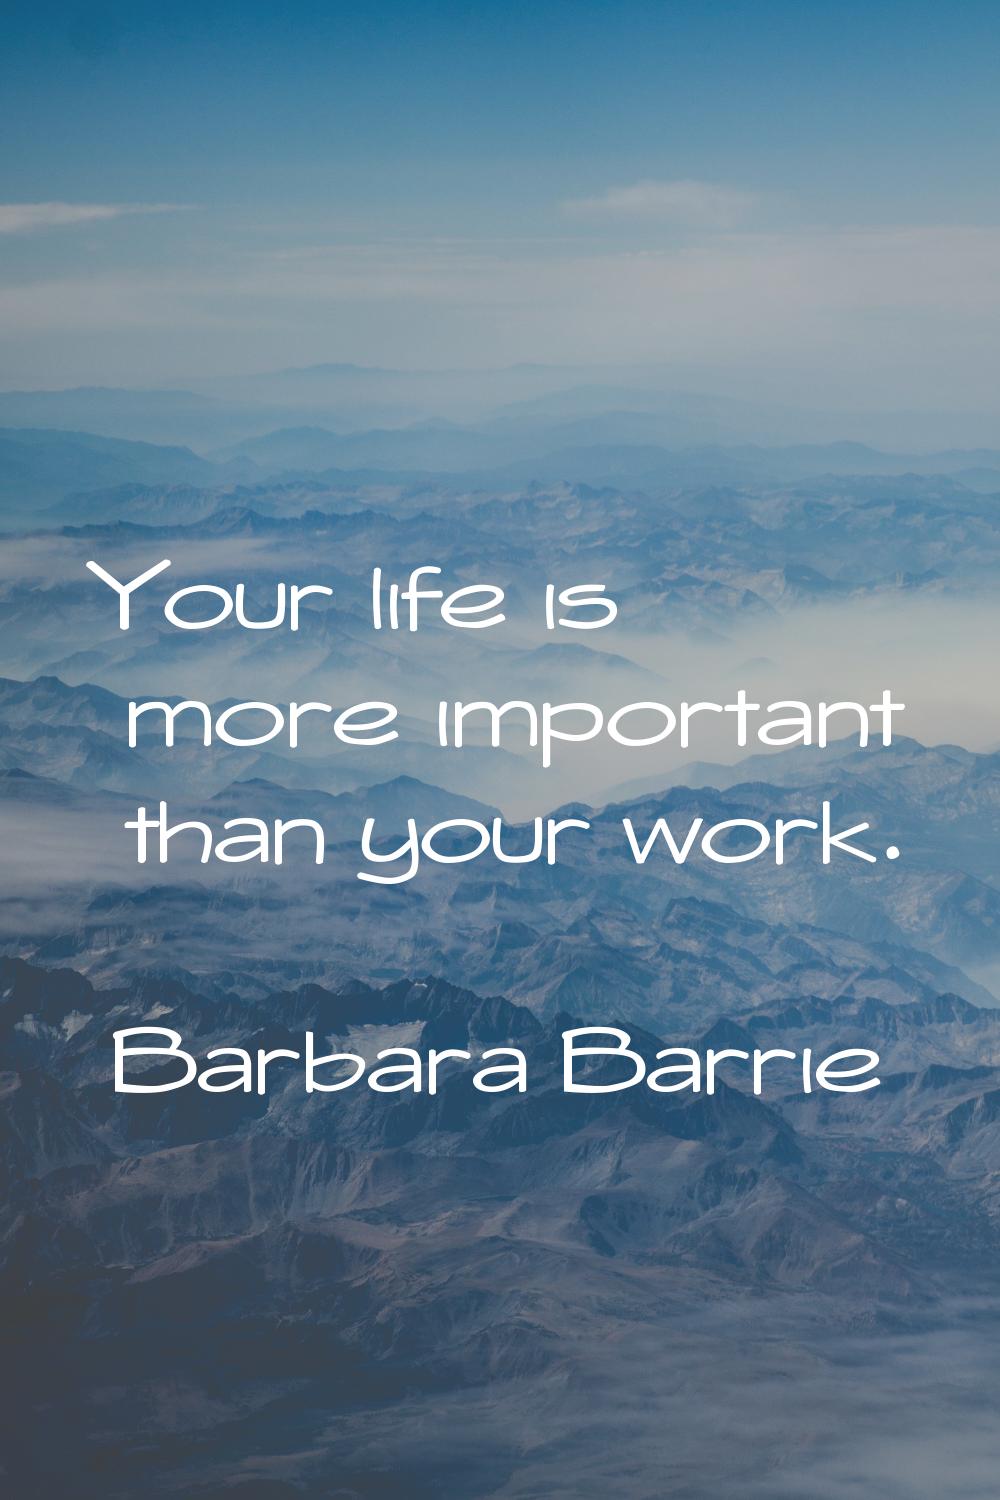 Your life is more important than your work.